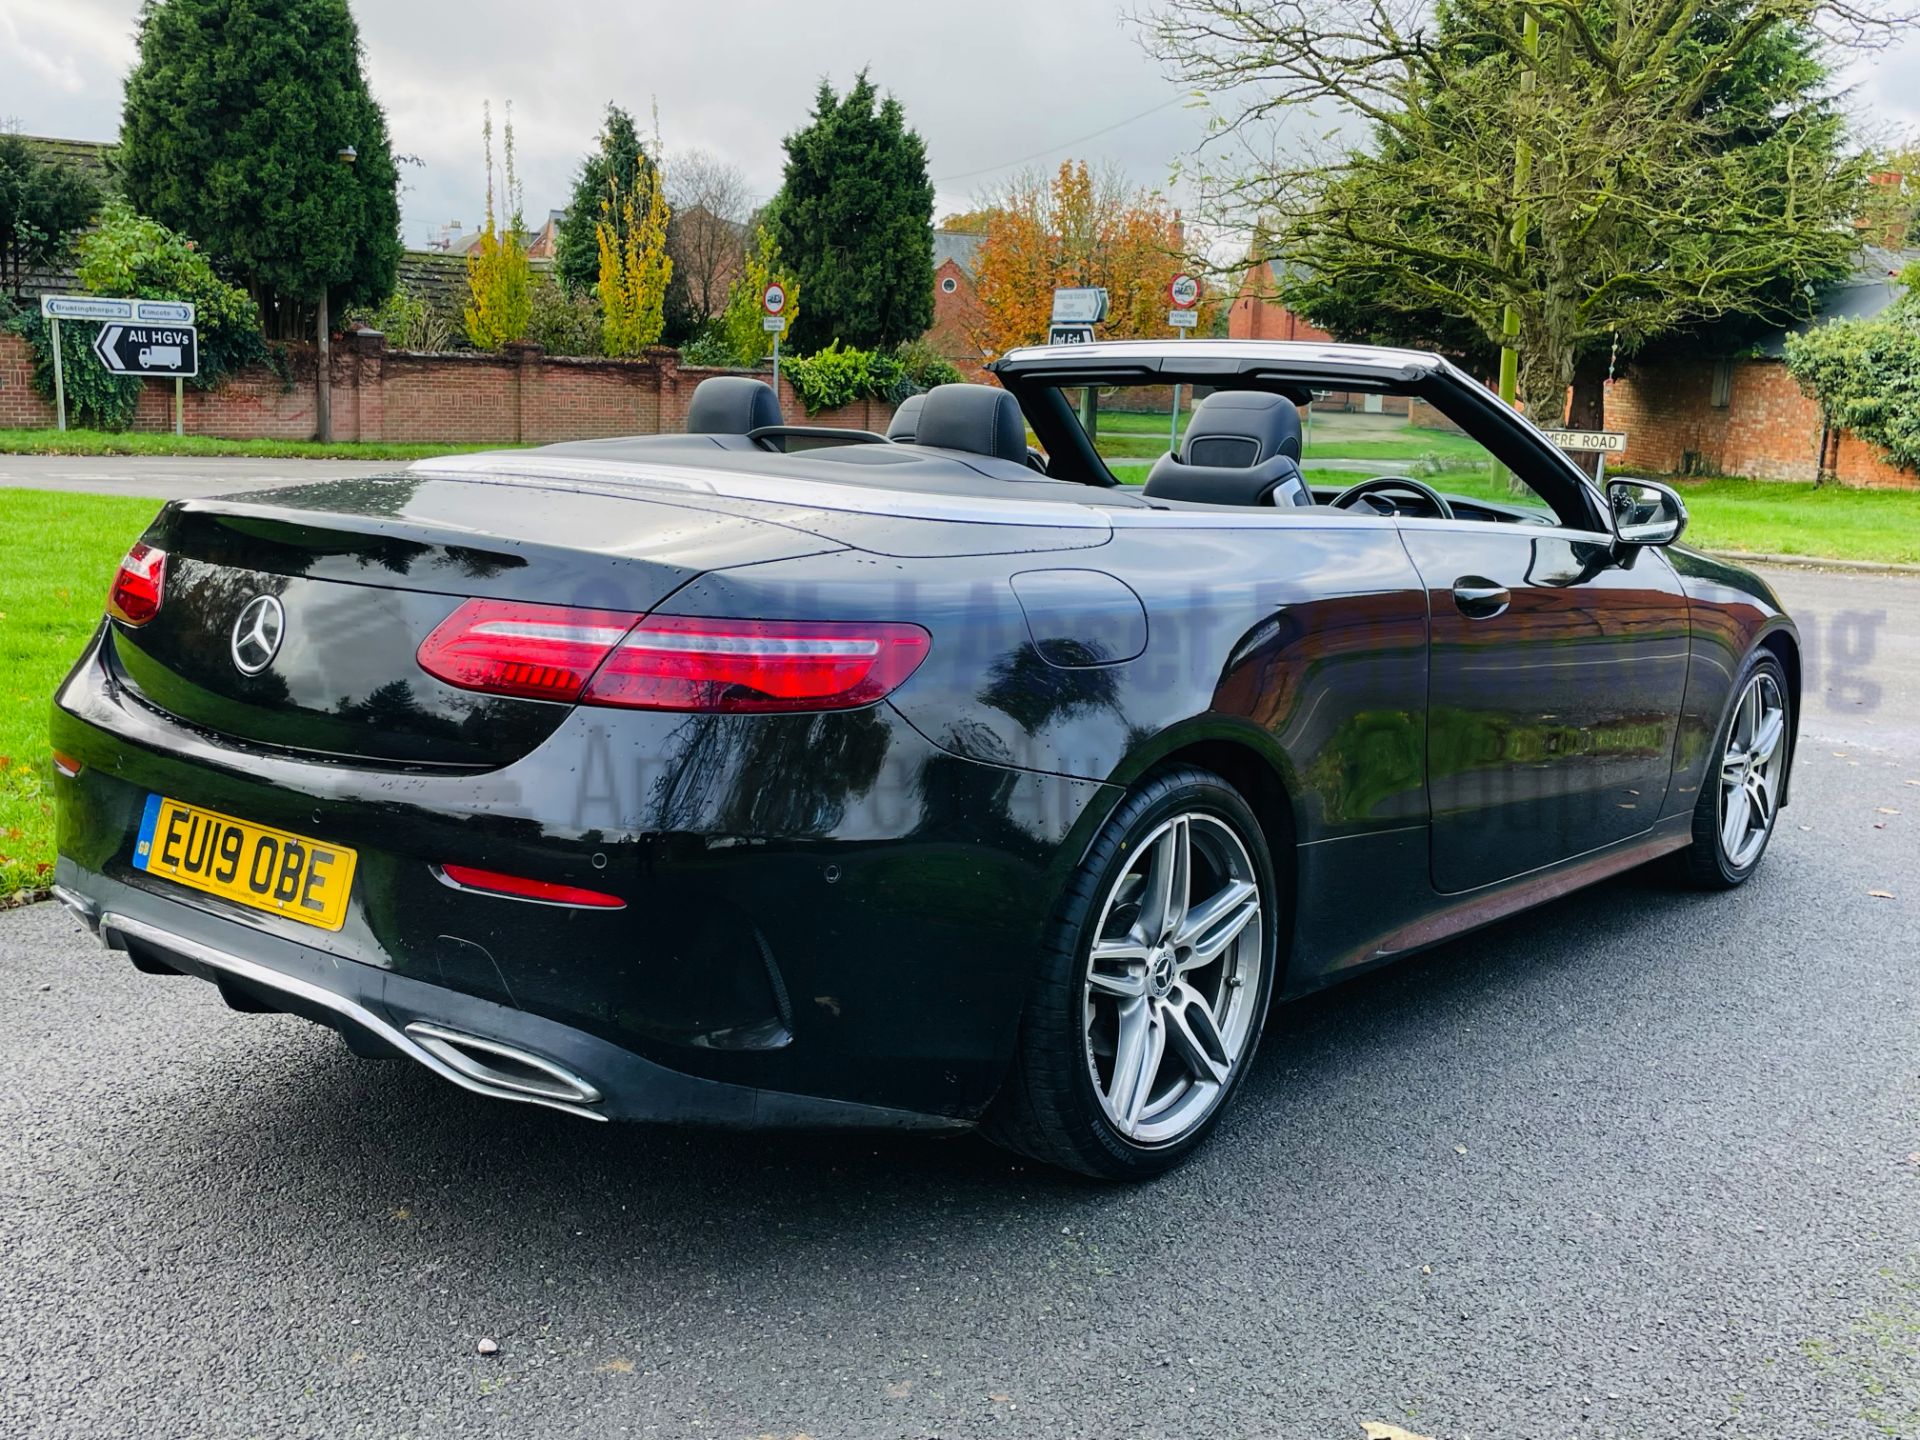 MERCEDES-BENZ E220D *AMG LINE - CABRIOLET* (2019 - EURO 6) '9G TRONIC AUTO - SAT NAV' *FULLY LOADED* - Image 25 of 66